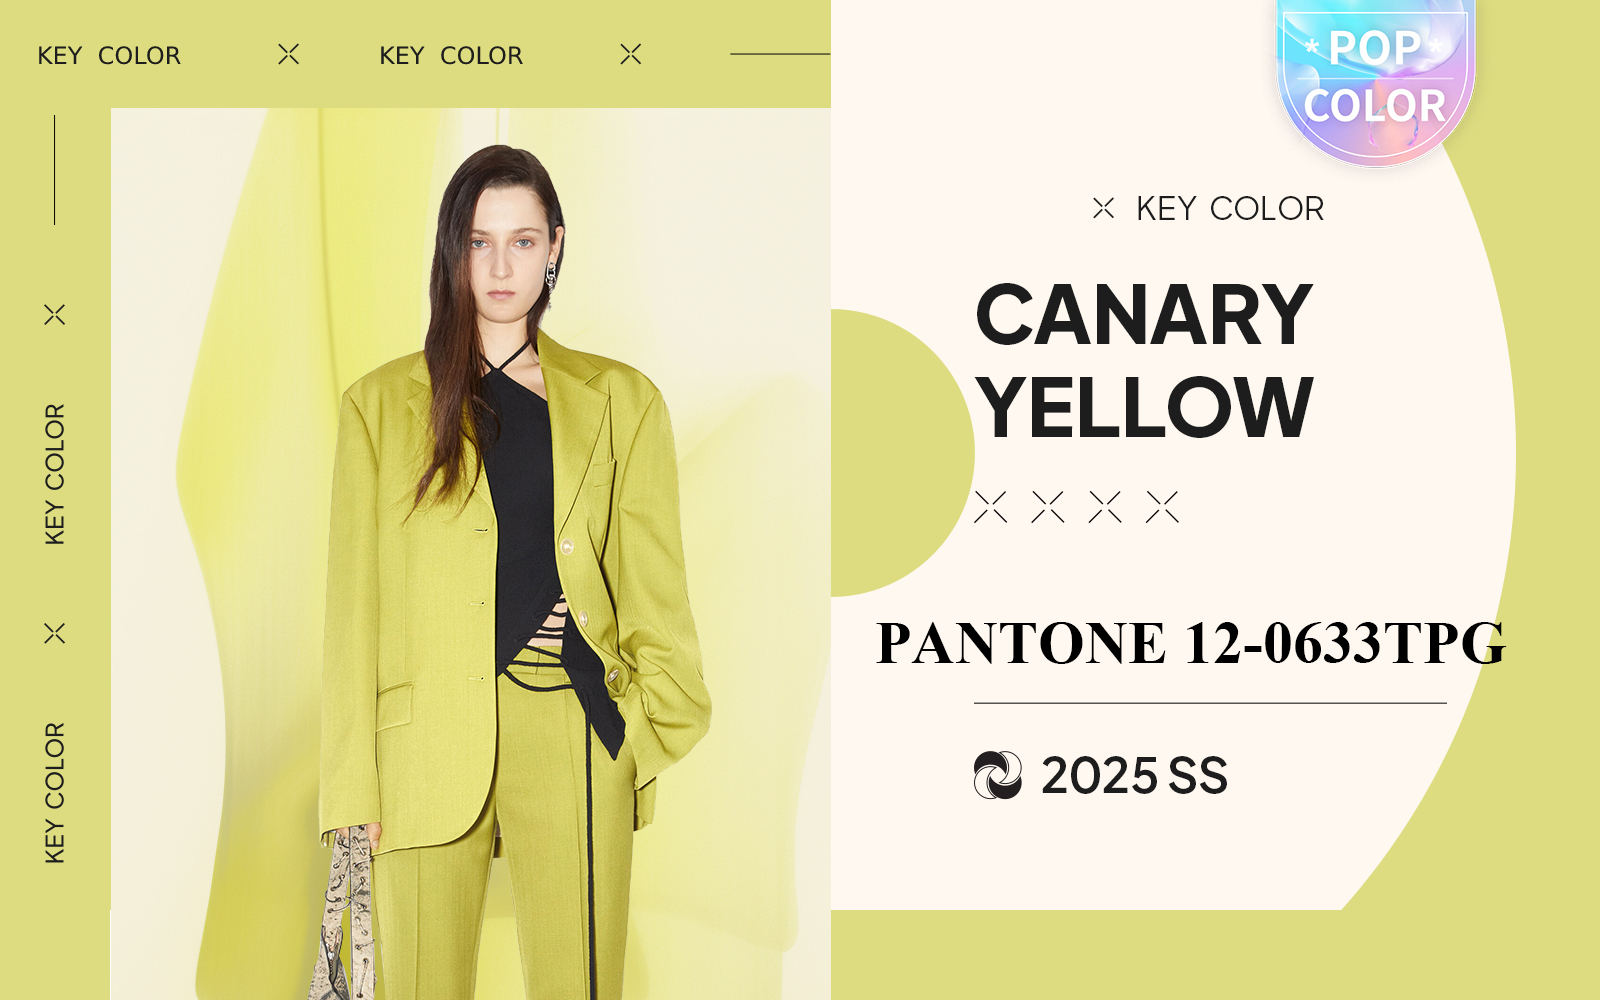 Canary Yellow -- The Color Trend for Womenswear